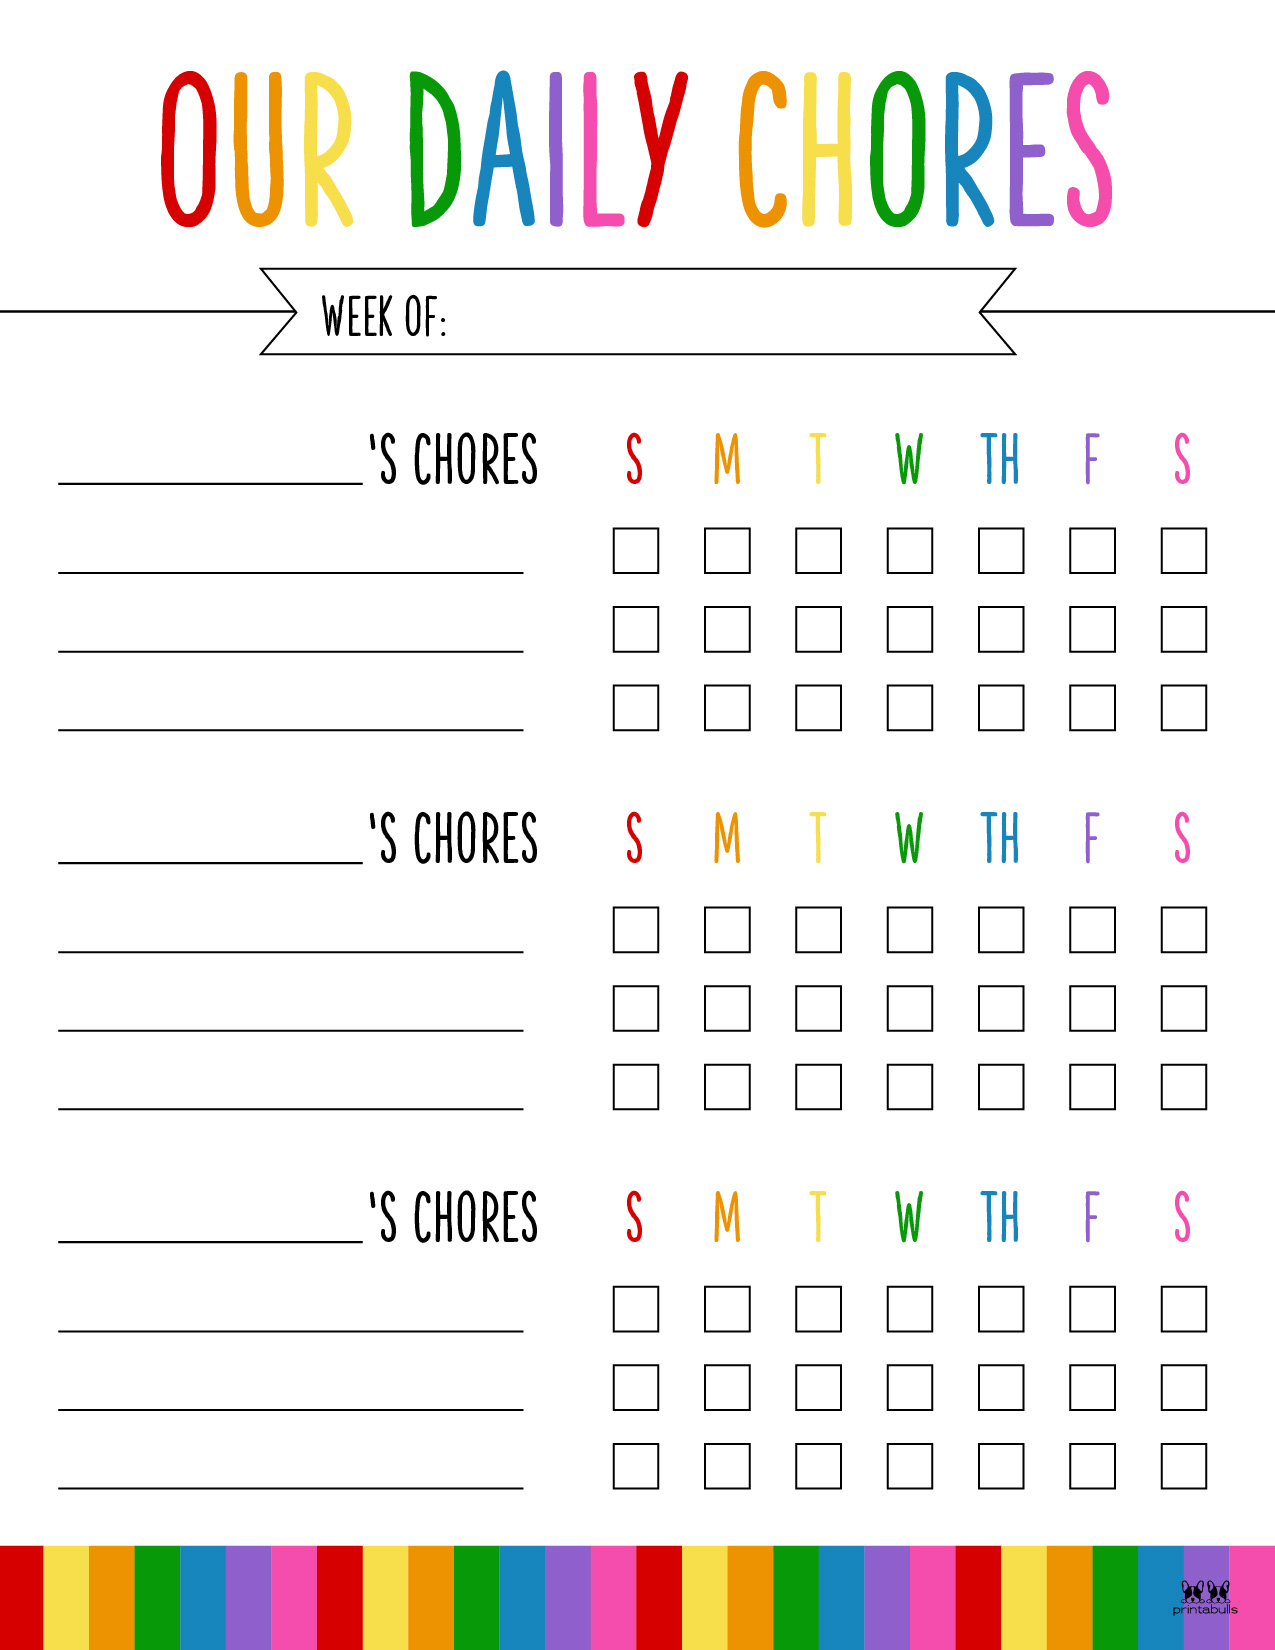 schedule for daily chores for kids